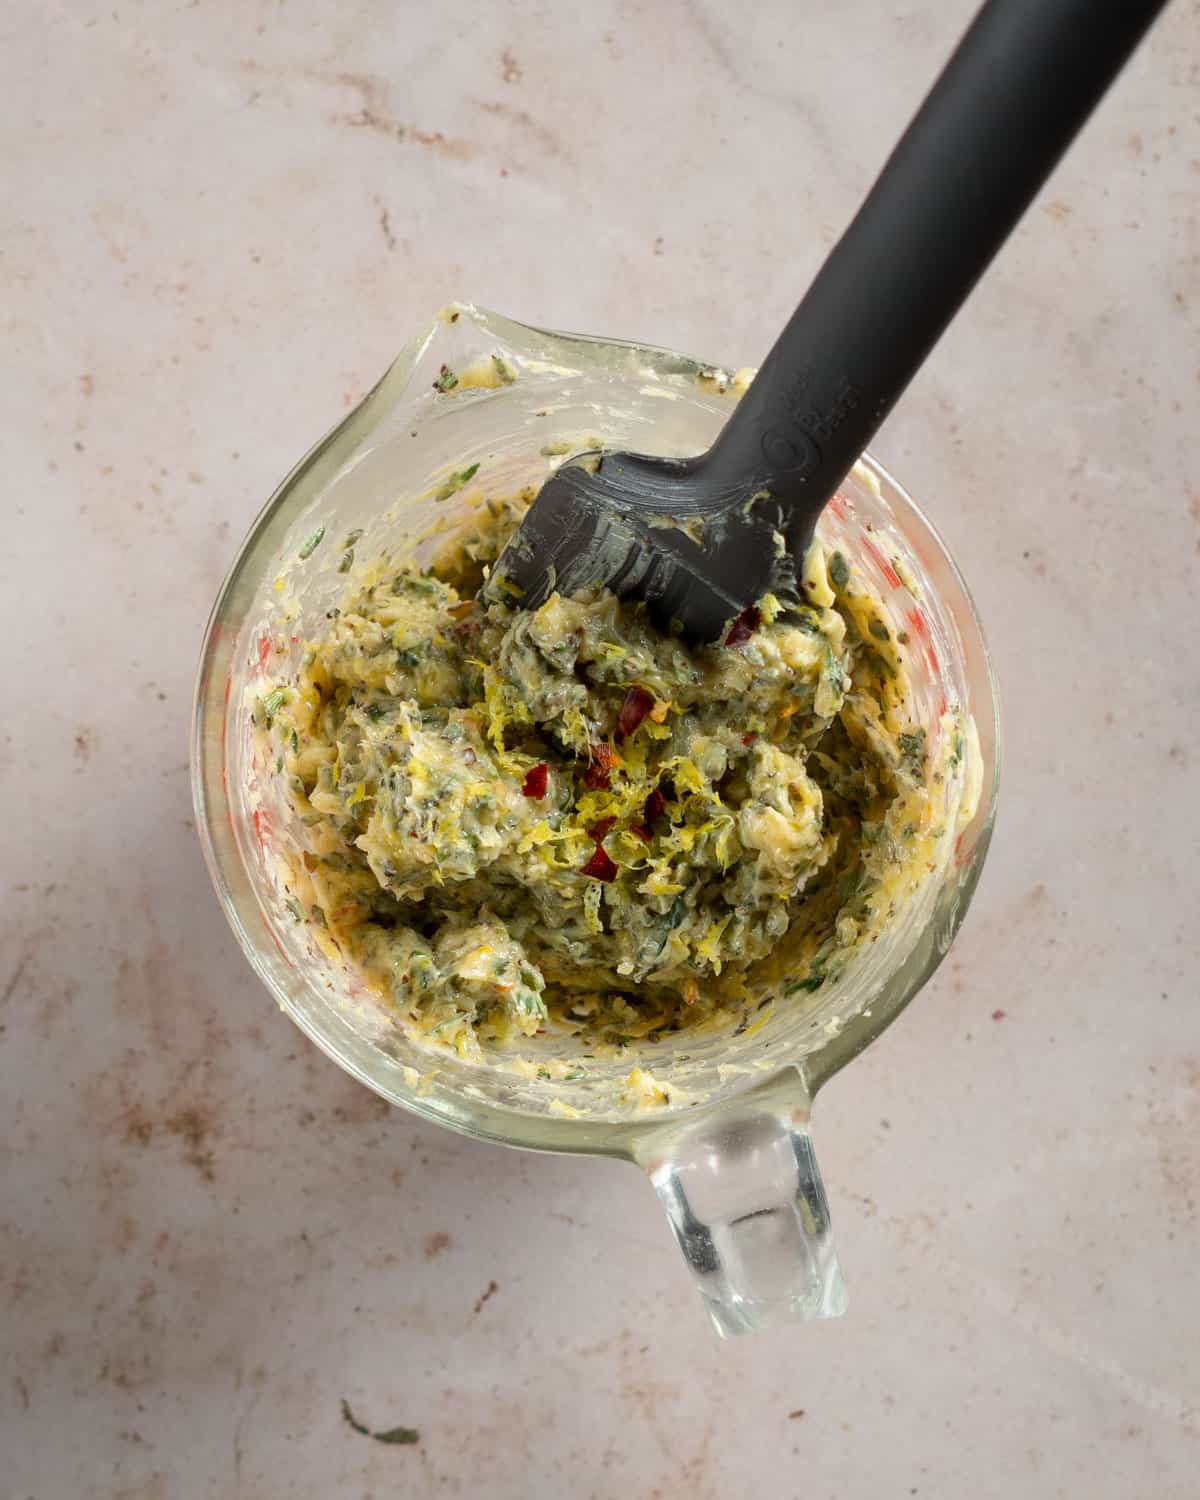 Garlic and herb compound butter in a glass measuring cup.